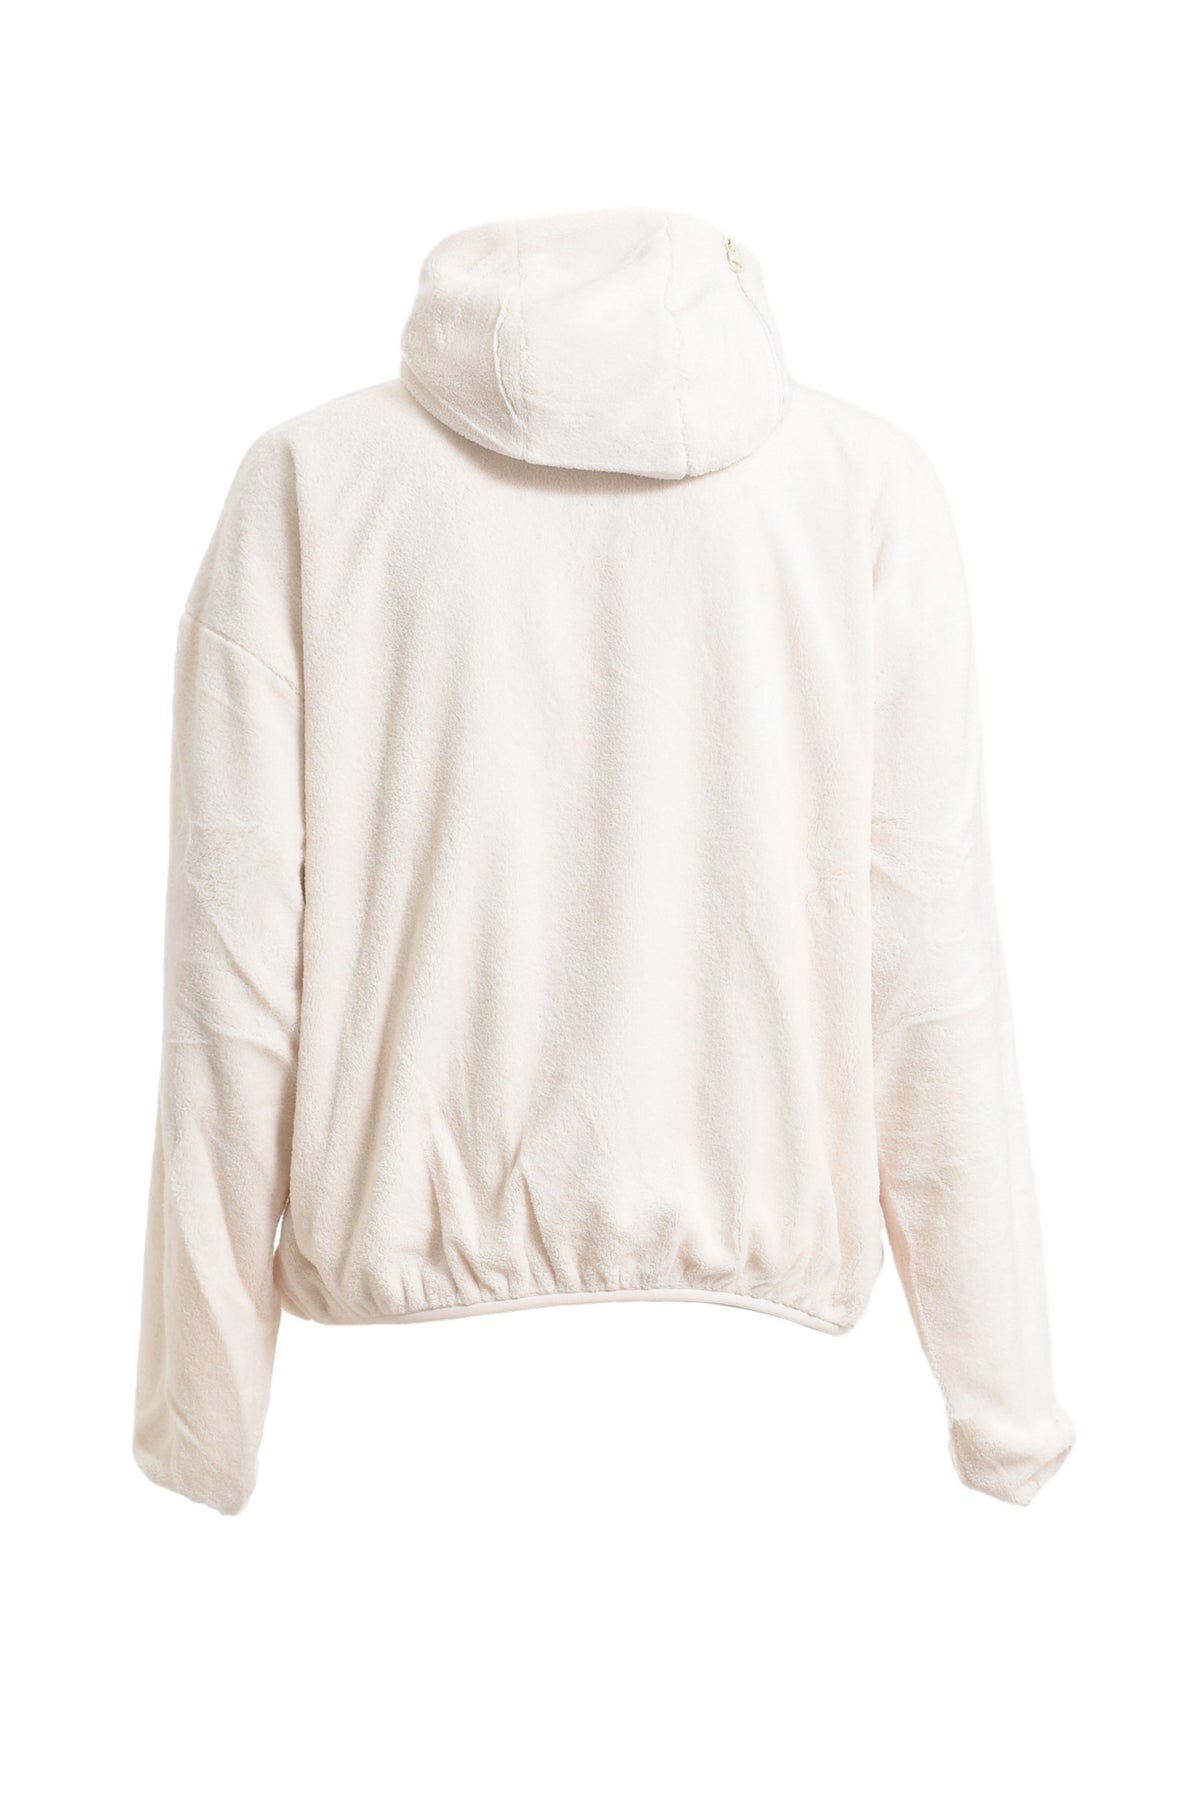 POST ARCHIVE FACTION (PAF) 5.1 HOODIE CENTER / IVORY